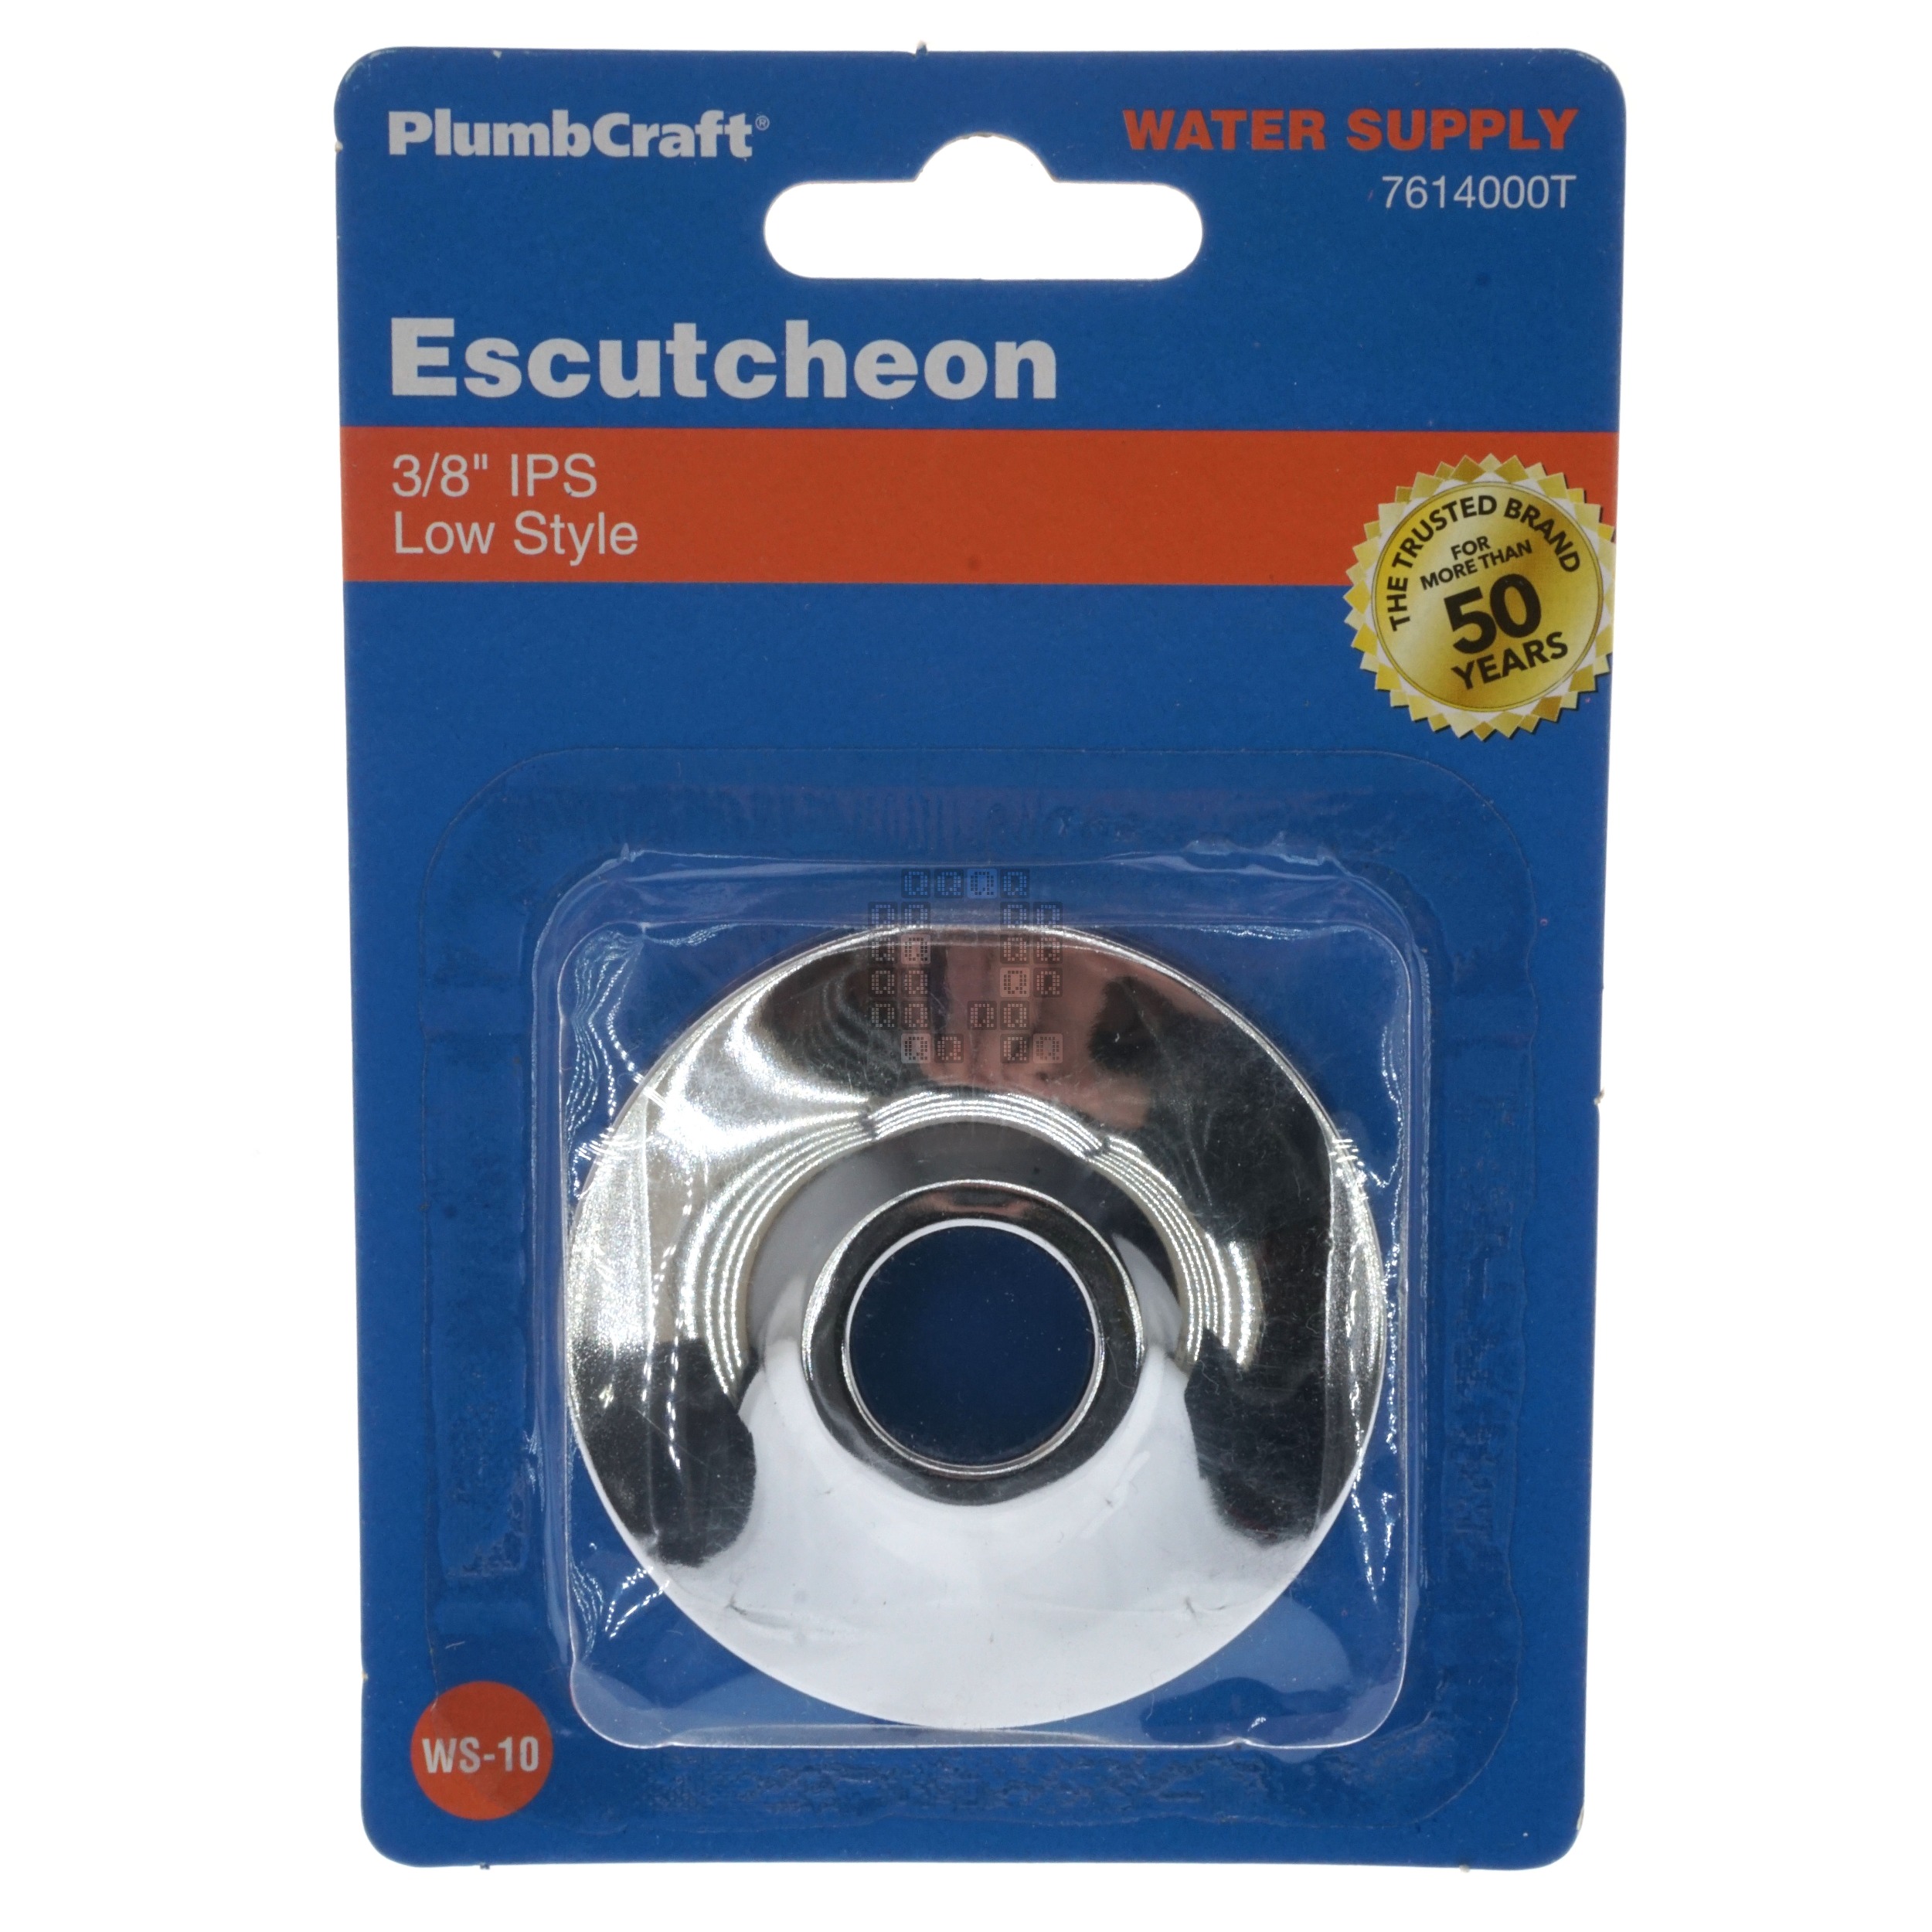 PlumbCraft 7614000T Stainless Steel Escutcheon, Chrome Plated, 3/8" IPS, Low Style